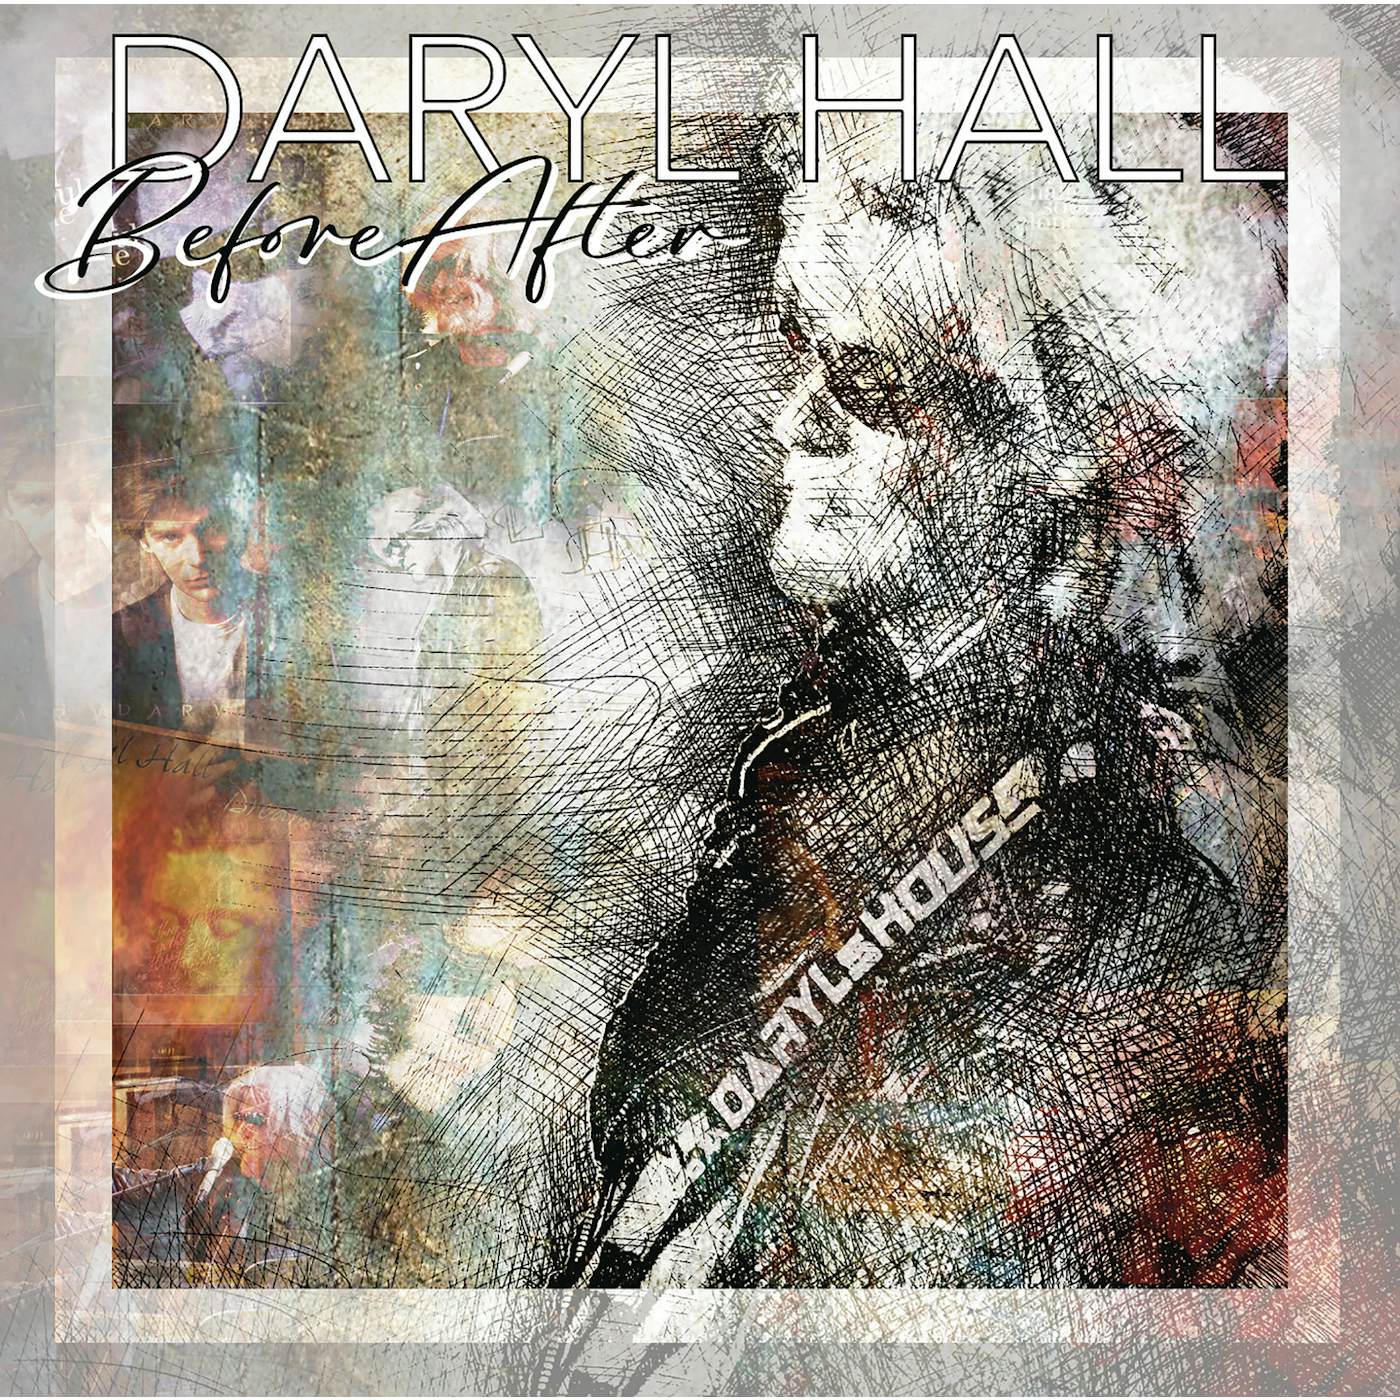 Daryl Hall BEFORE AFTER CD